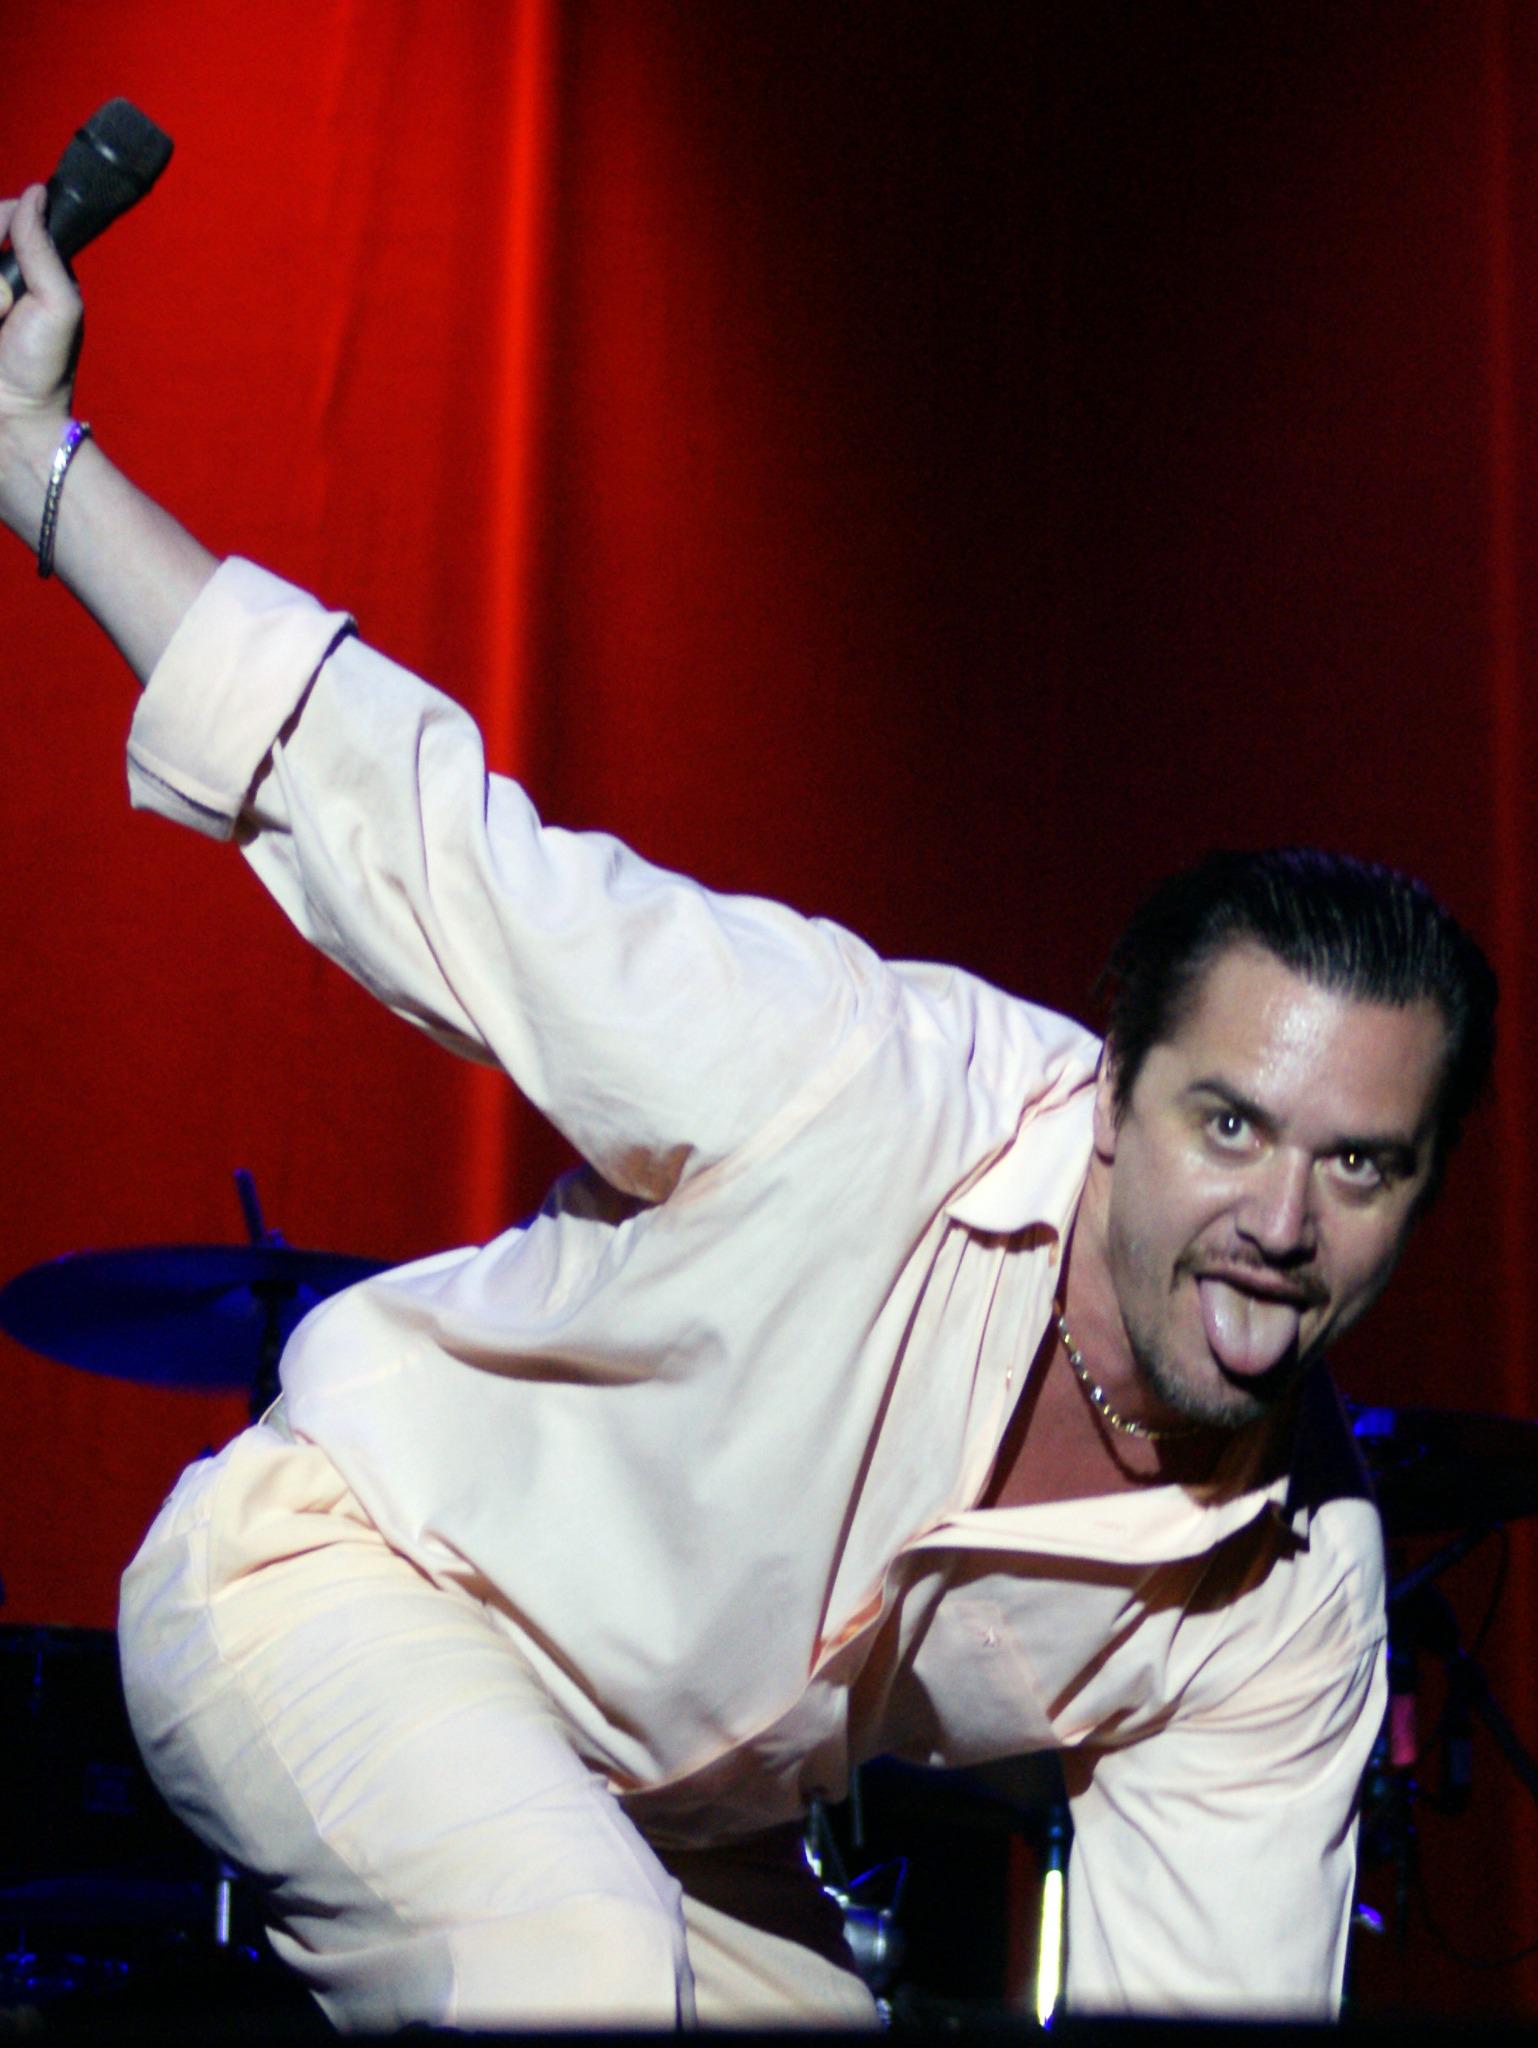 HAPPY BIRTHDAY MIKE PATTON! frontman is 47 today  photo by me BBKLive 2010 